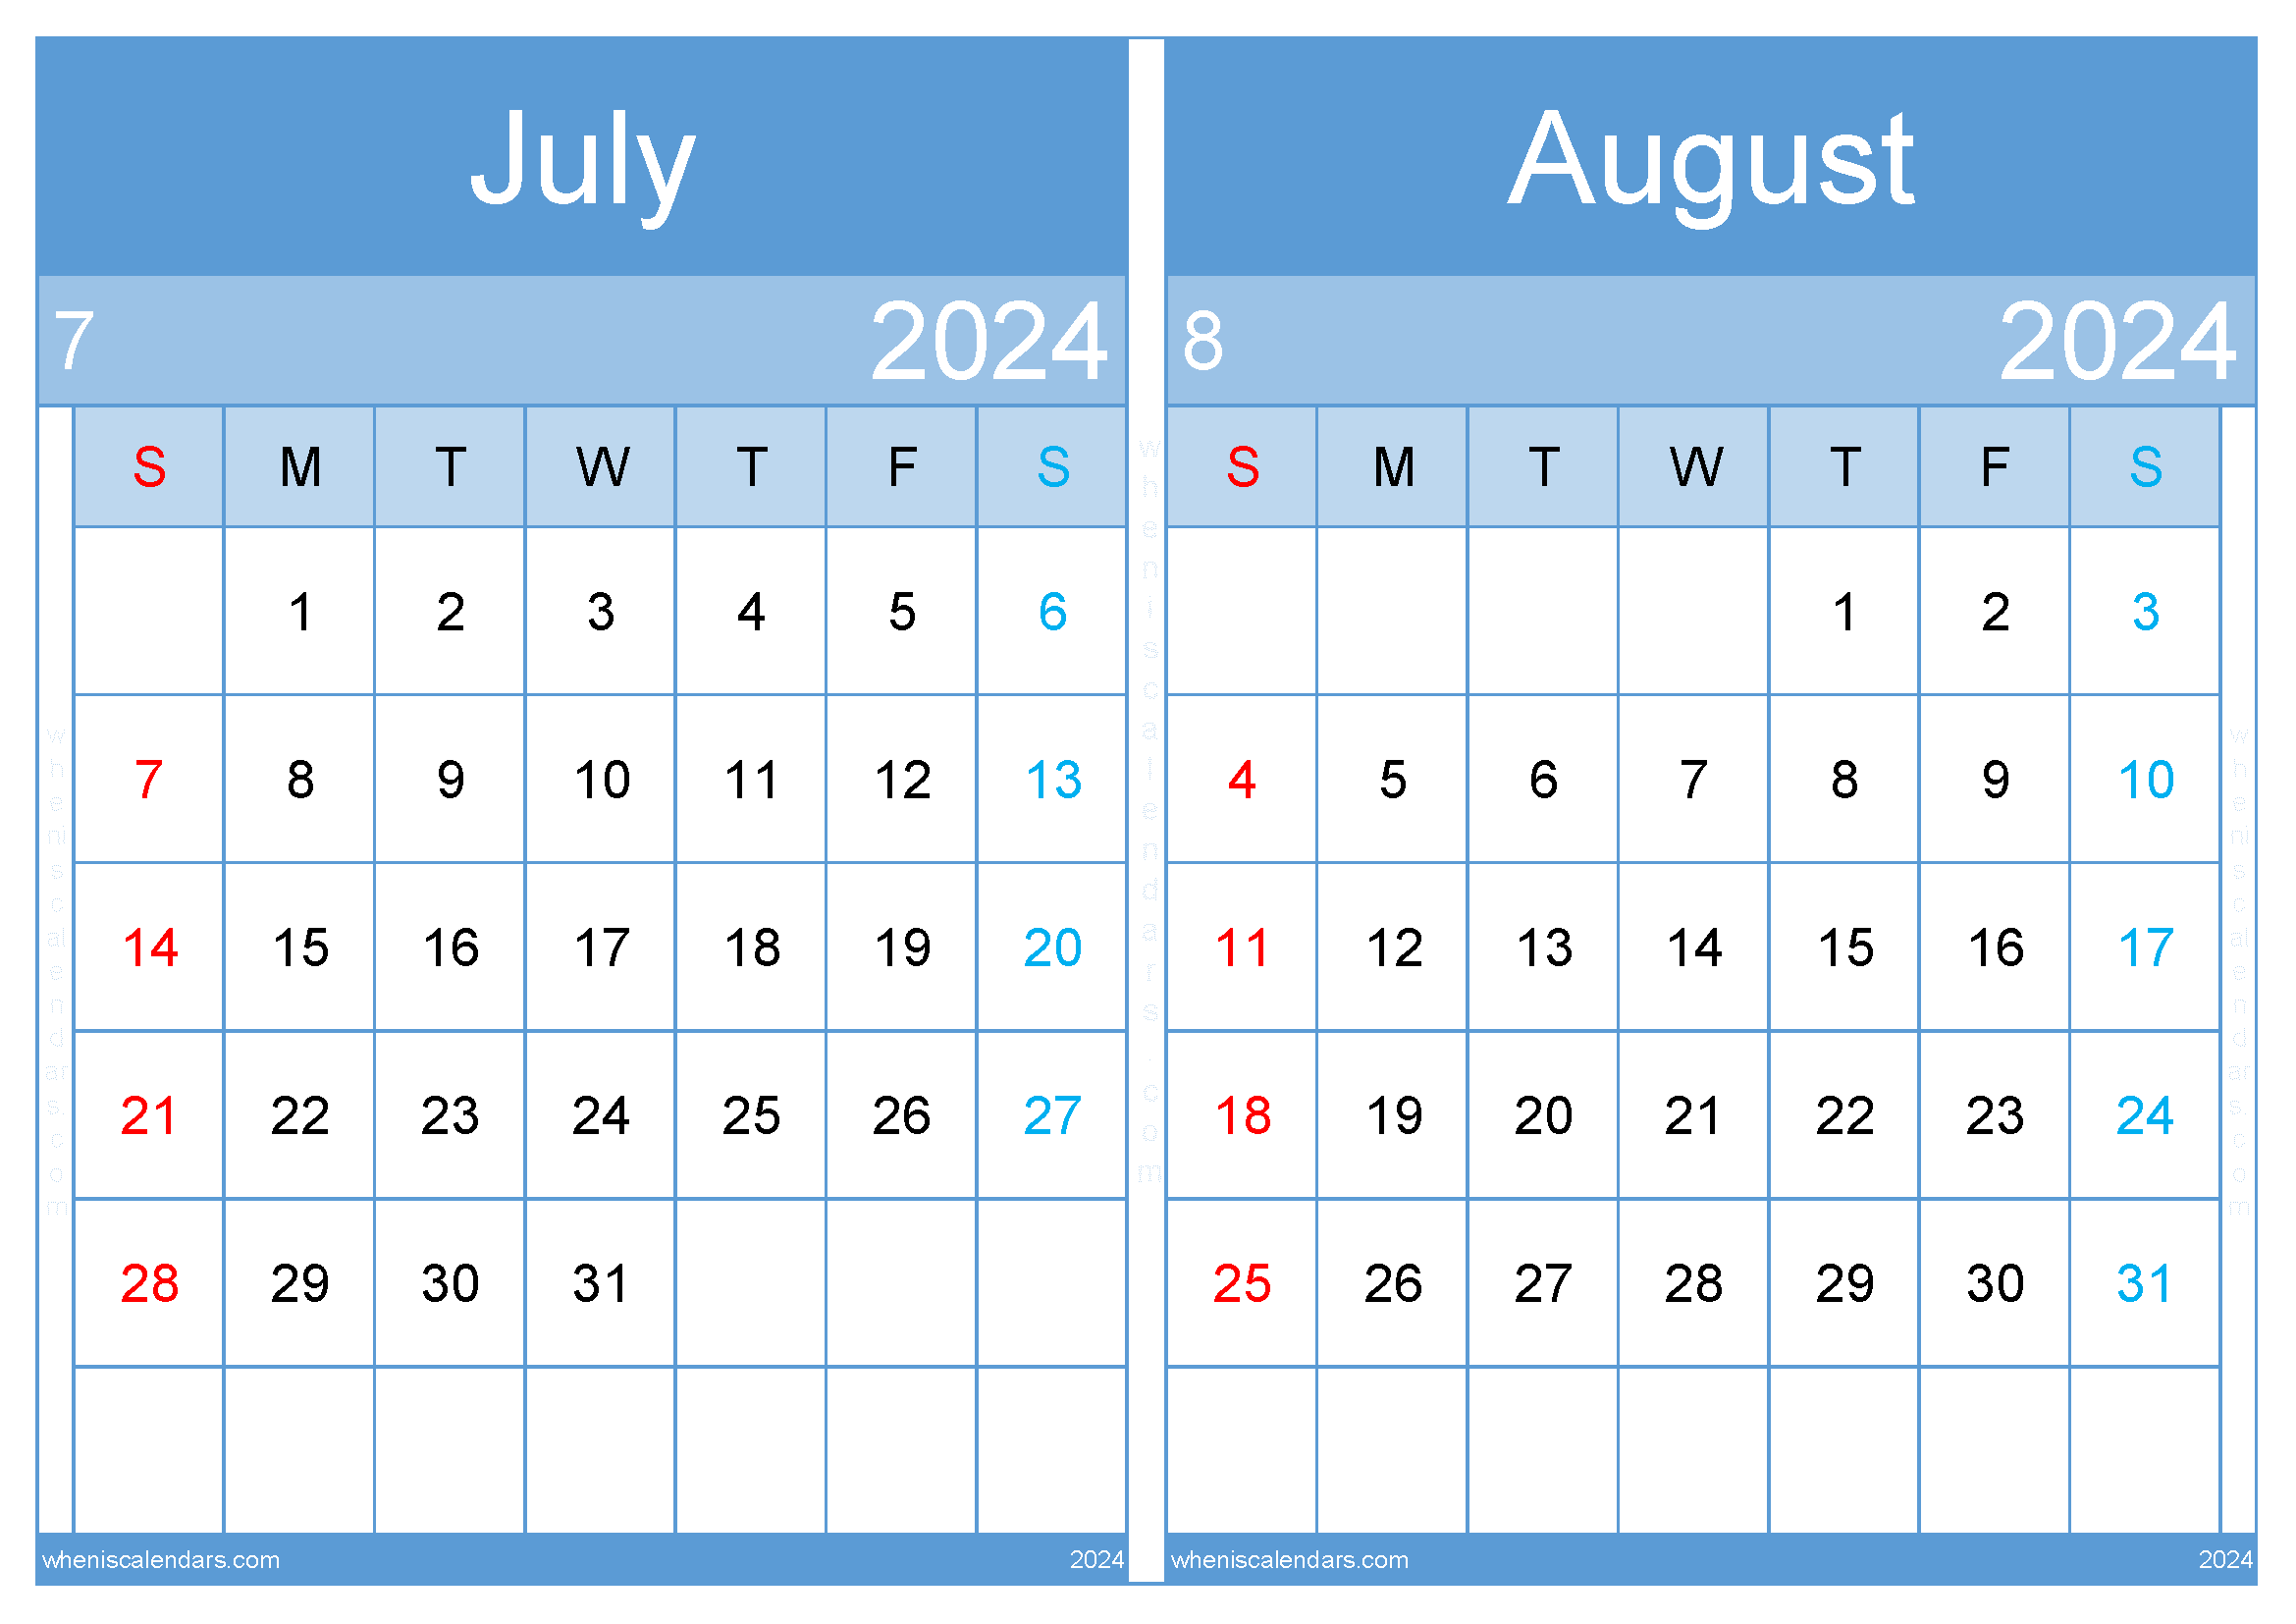 Download calendar 2024 July and August A4 JA24036